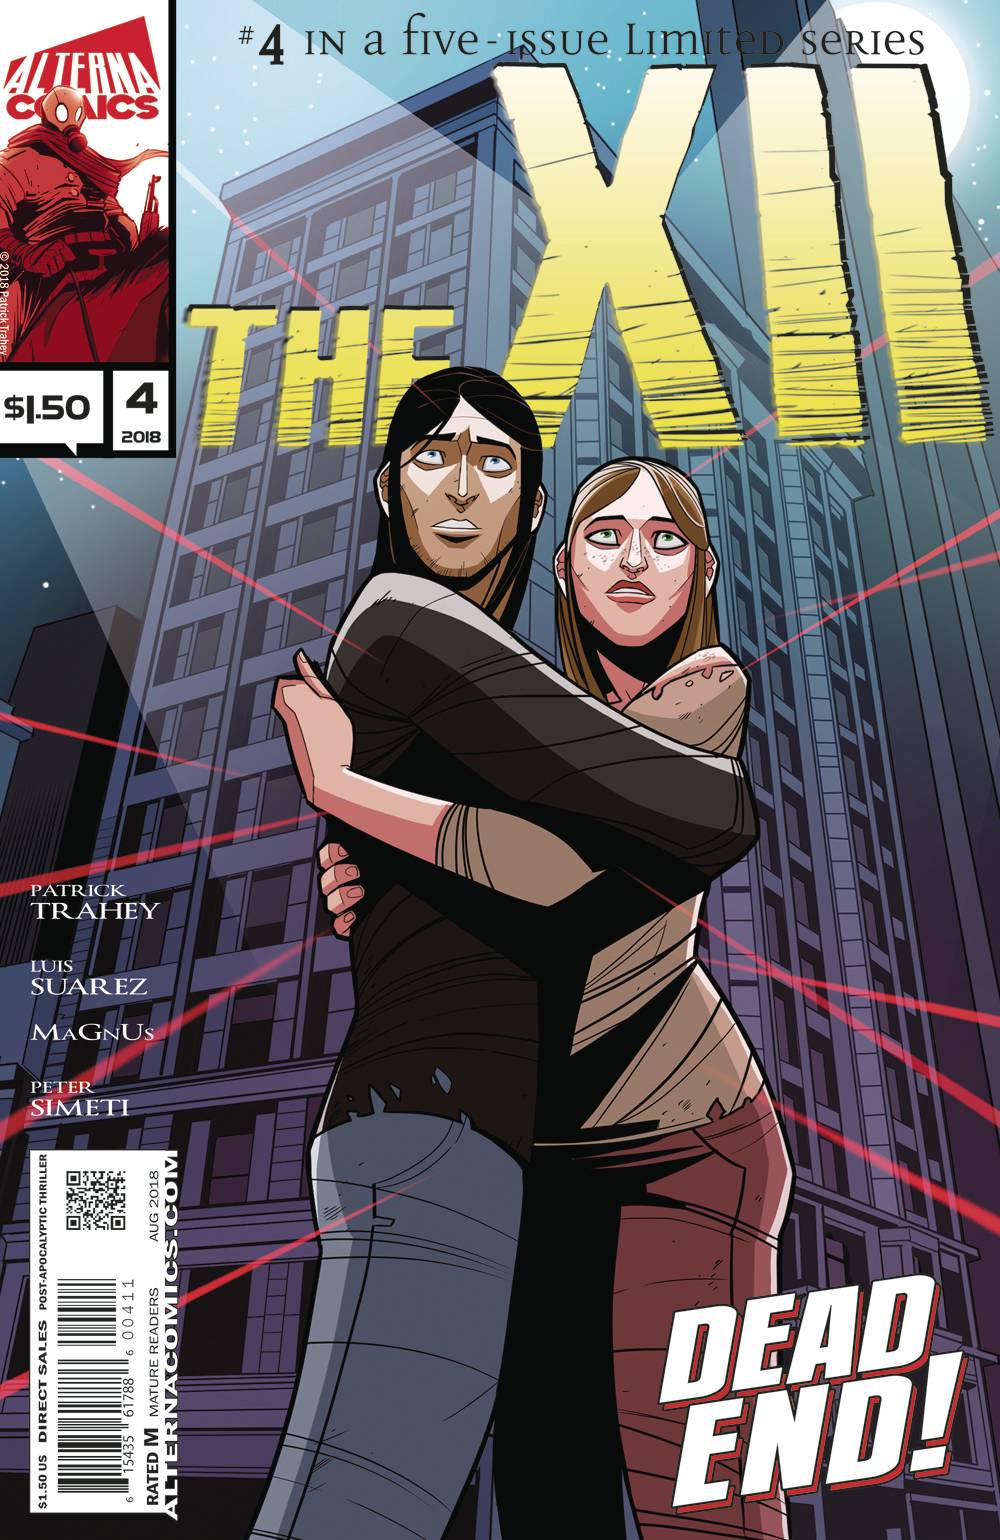 The Xii #4 (Mature) (Of 5)